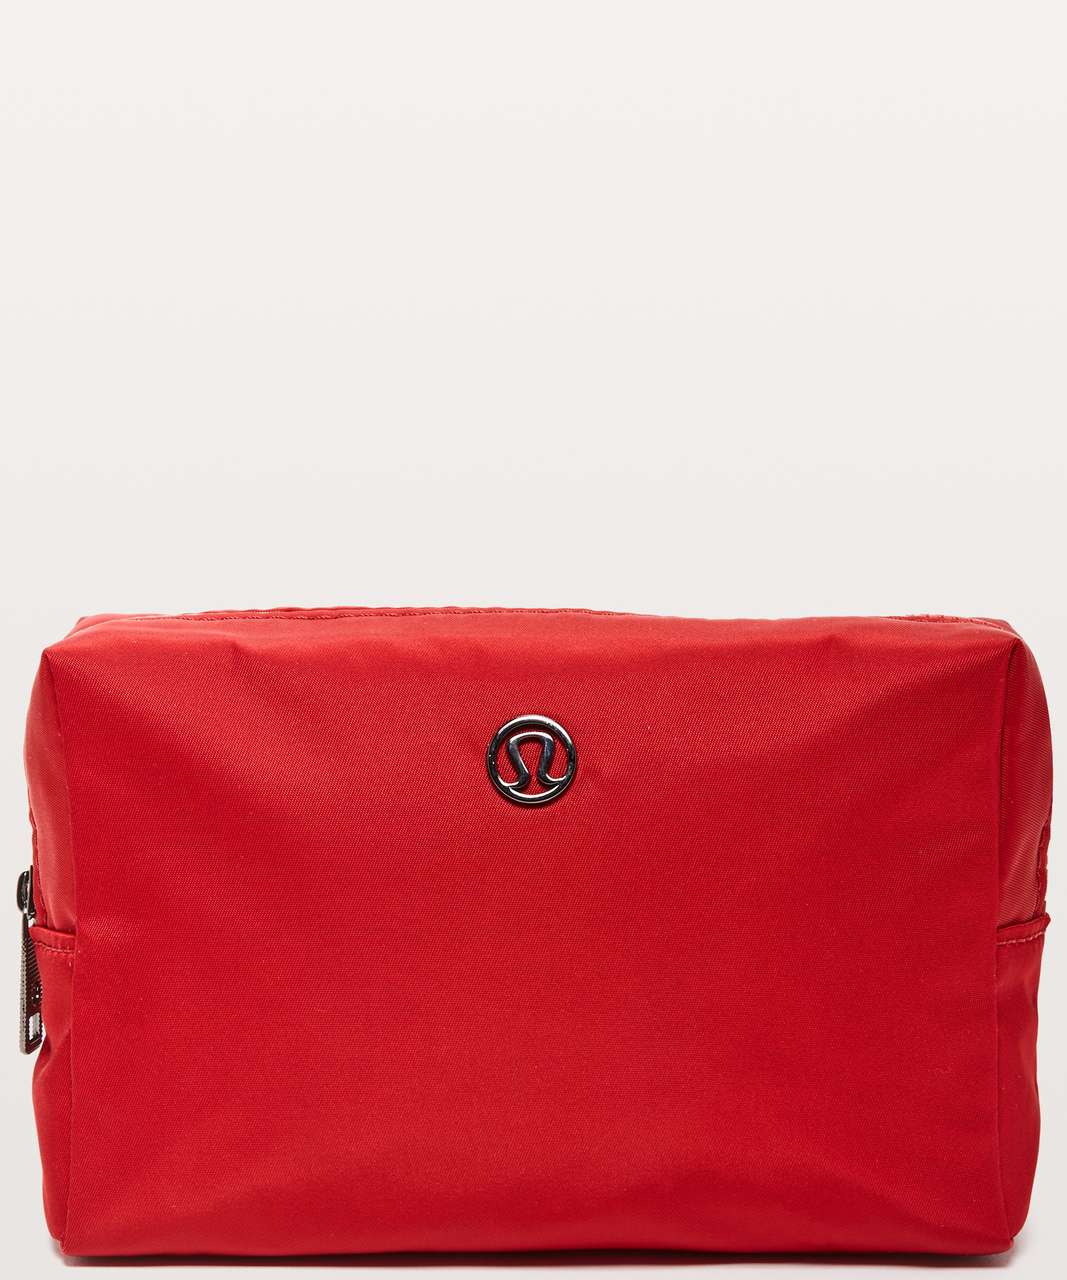 Lululemon All Your Small Things Pouch *Mini 2L - Dark Red (First Release)